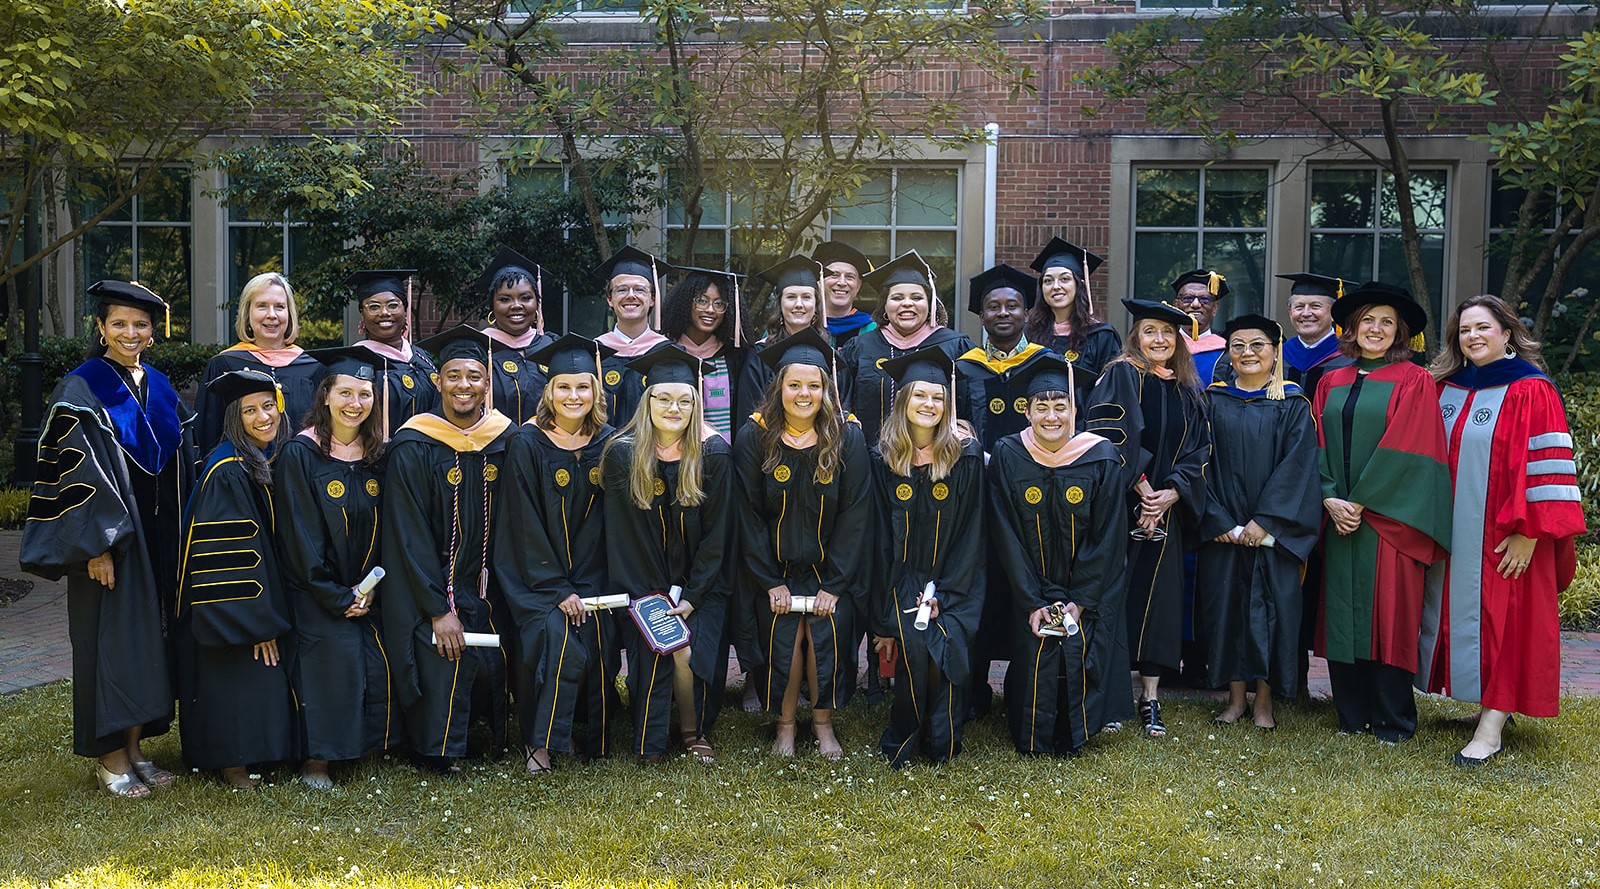 A group of 25 people in commencement robes pose for a photograph